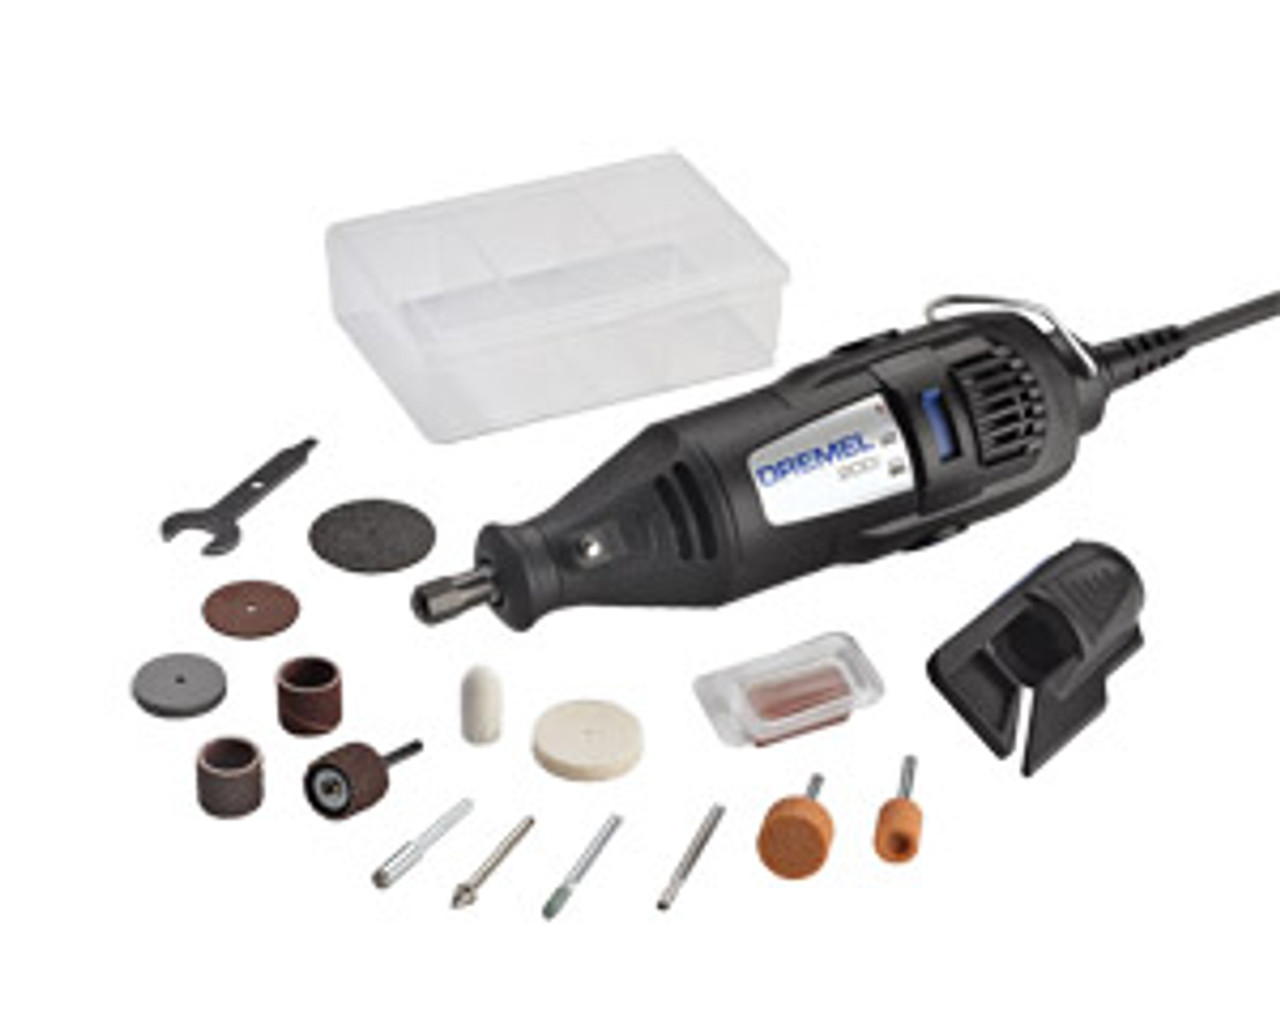 8240: All you need to know!  Dremel, Rotary tool, Tool design